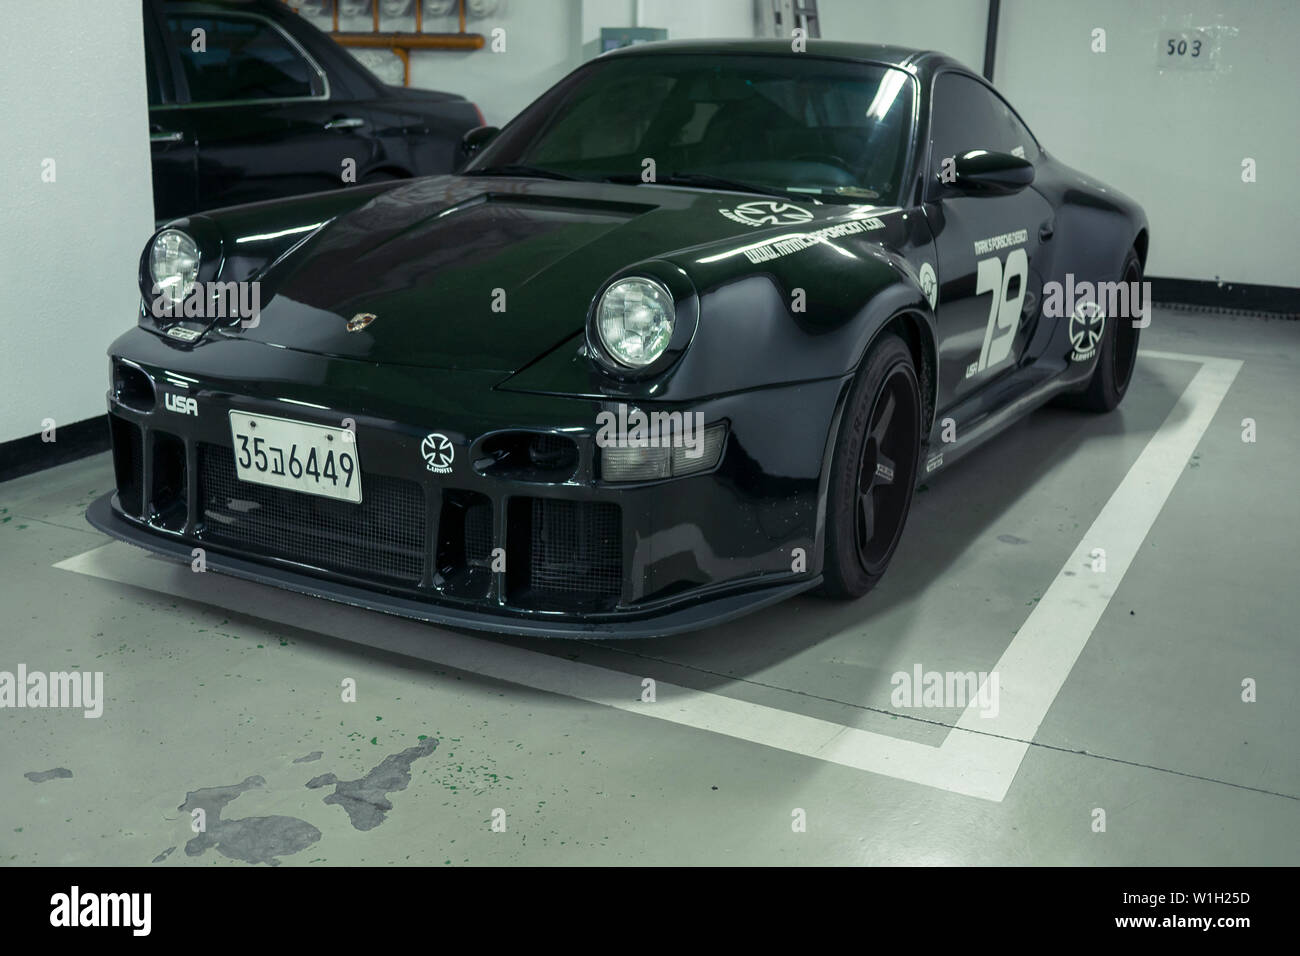 Porsche Tuning High Resolution Stock Photography and Images - Alamy